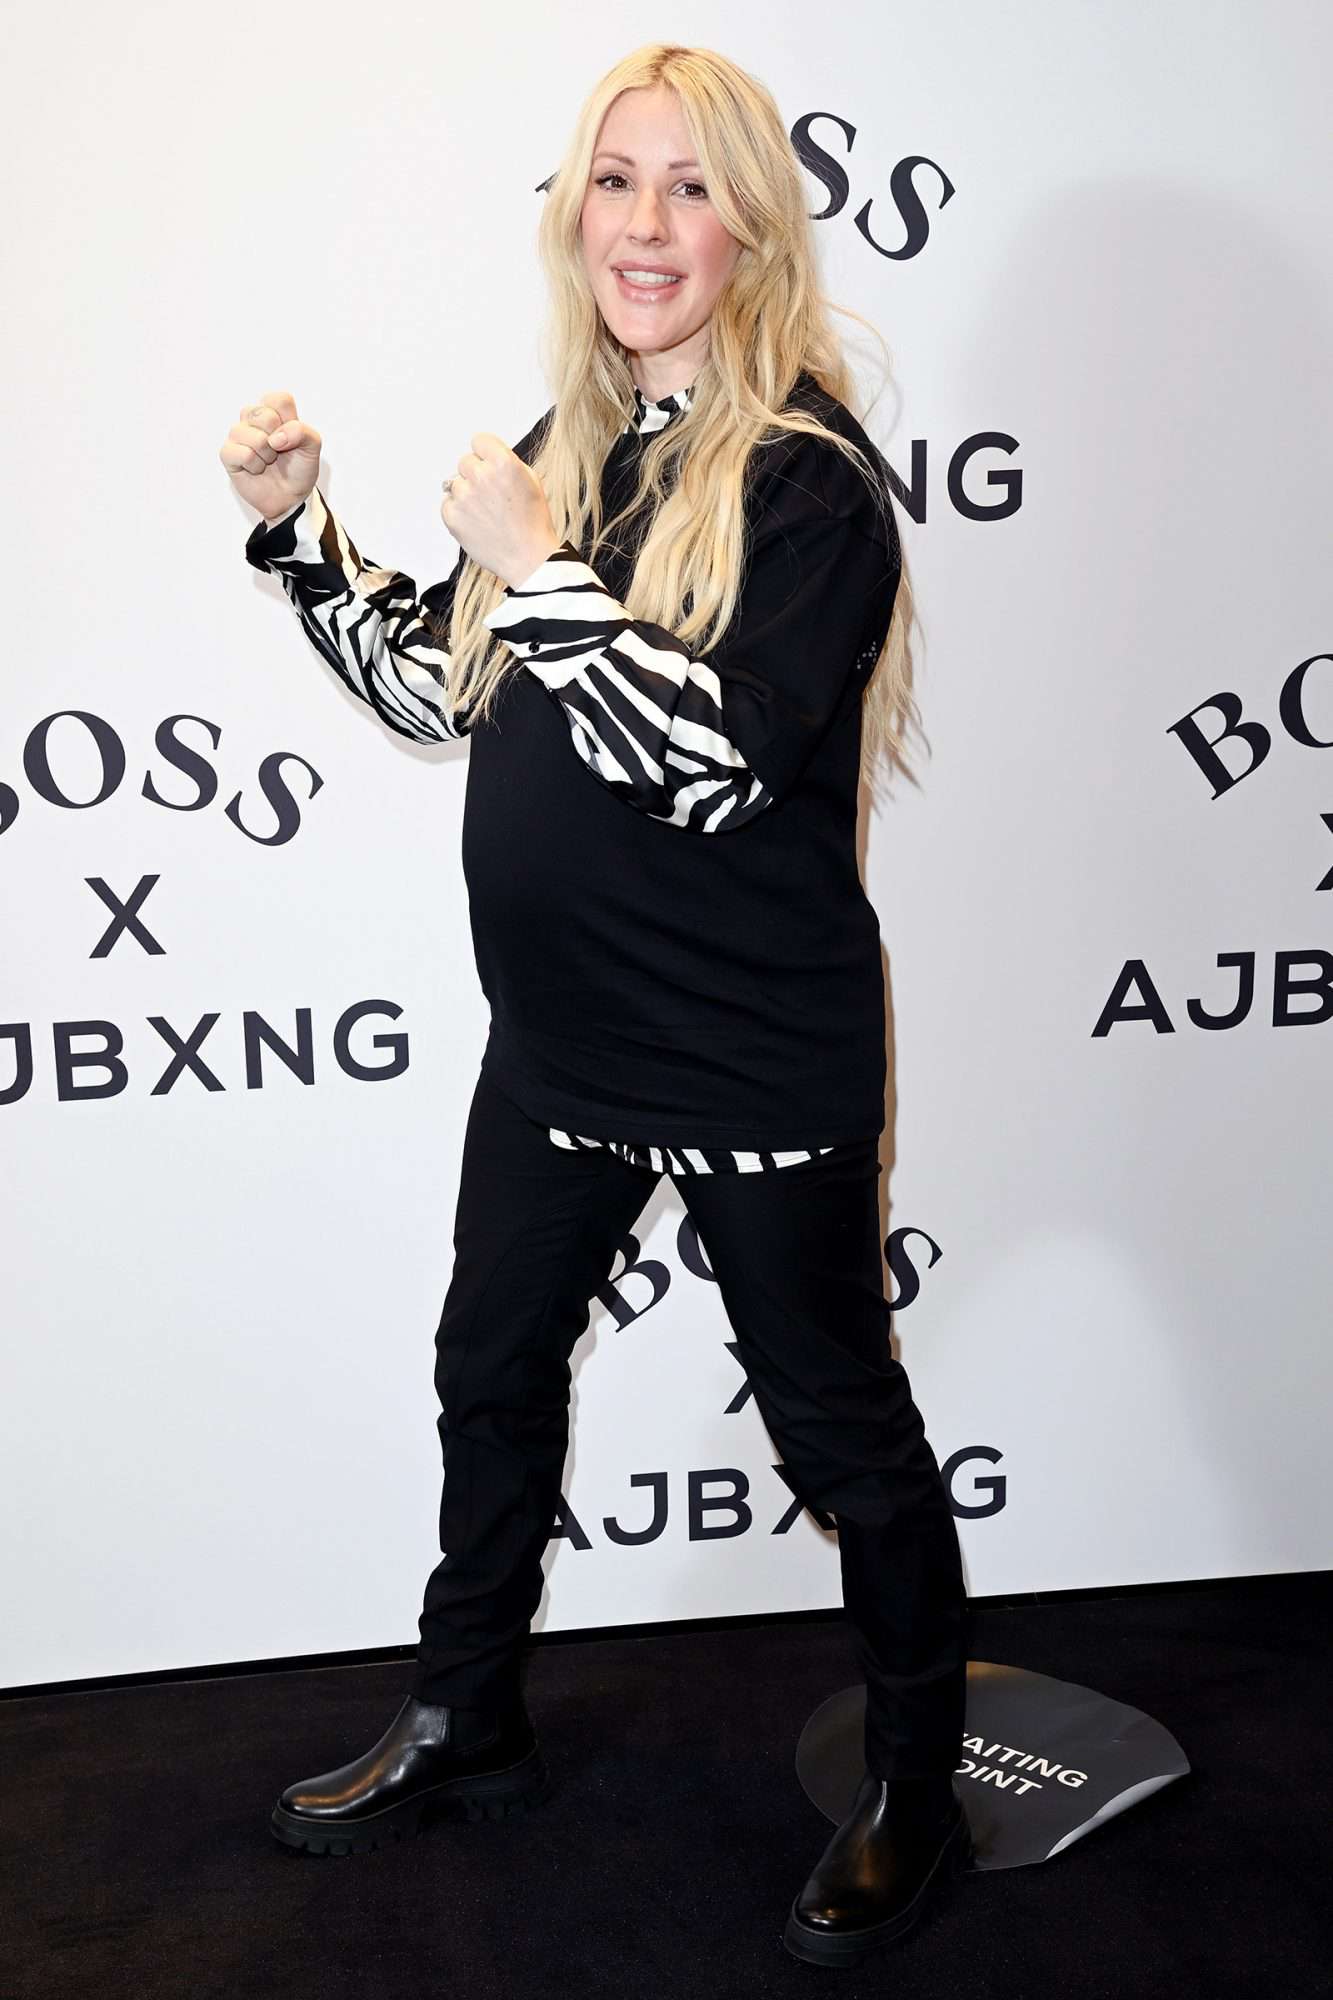 Ellie Goulding attends the unveiling of the new BOSS x Anthony Joshua Collection on February 24, 2021 in London, England